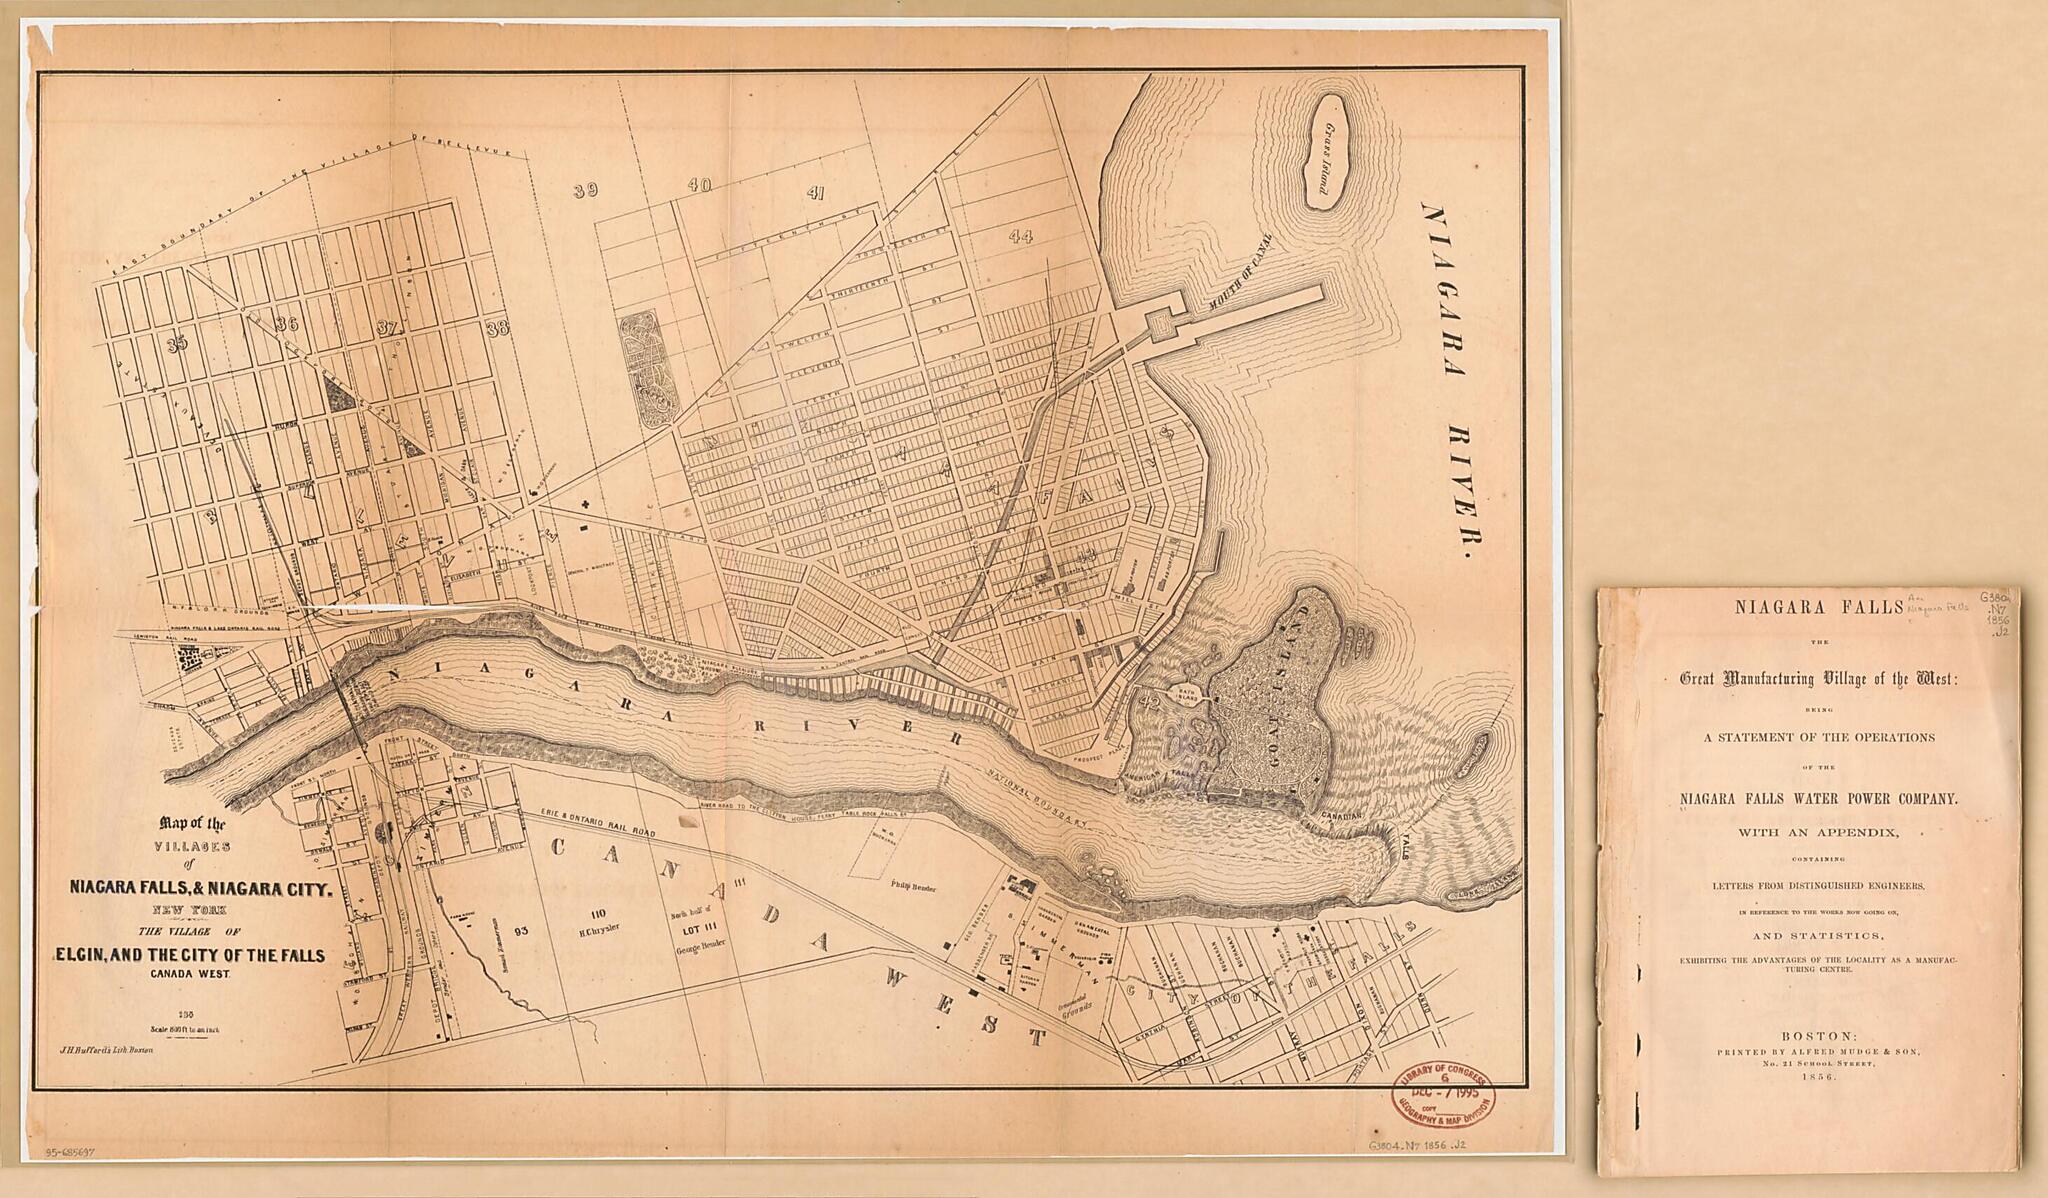 This old map of Map of the Villages of Niagara Falls &amp; Niagara City, New York : the Village of Elgin and the City of the Falls, Canada West from 1856 was created by  J.H. Bufford&